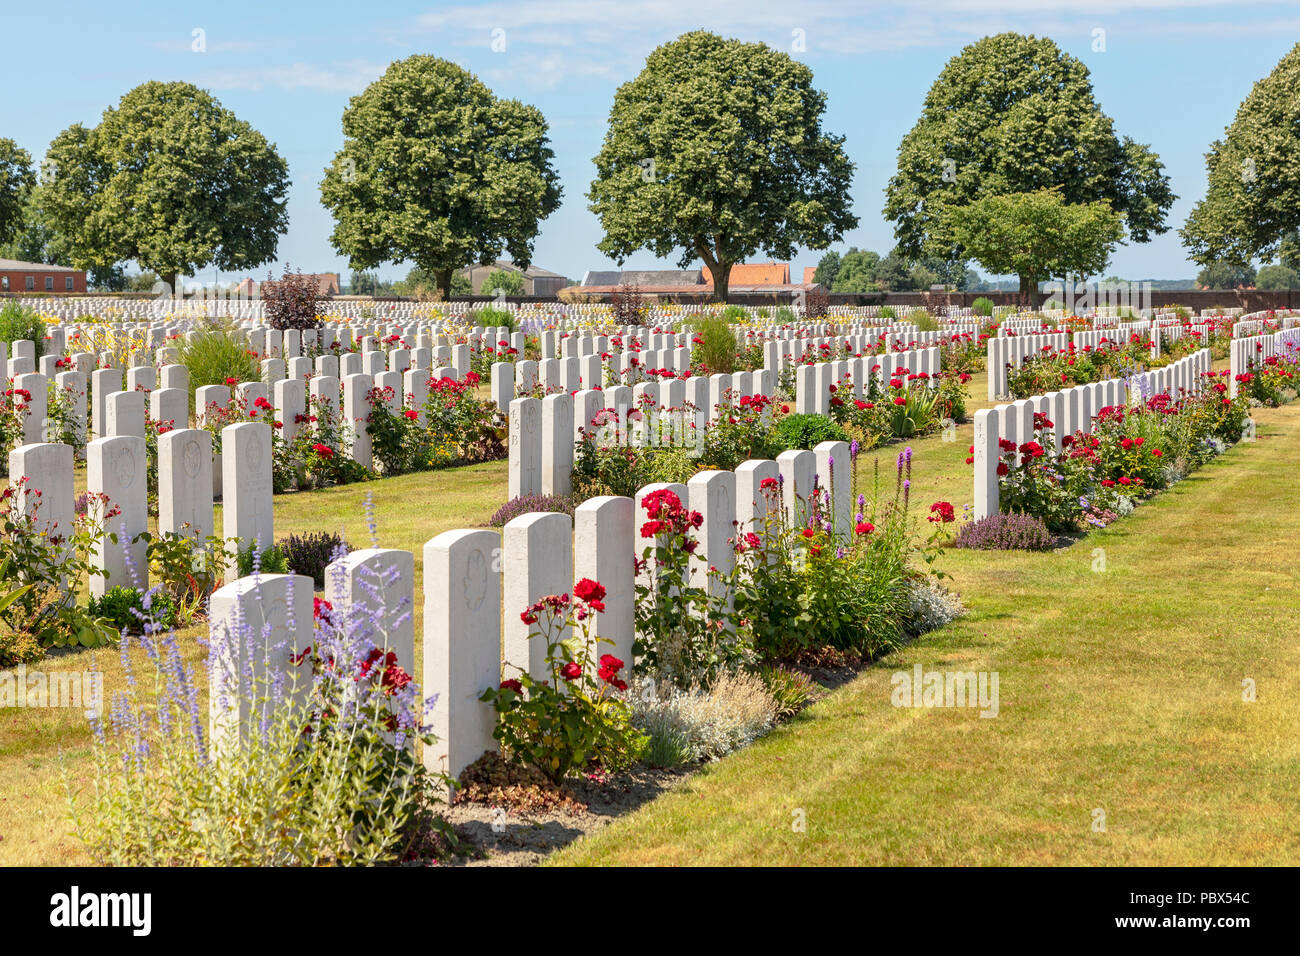 Commonwealth War graves Commission cemetery at Poelcapelle near Passchendaele, Belgium with 7500 graves including British, Canadian, Australian, New Z Stock Photo